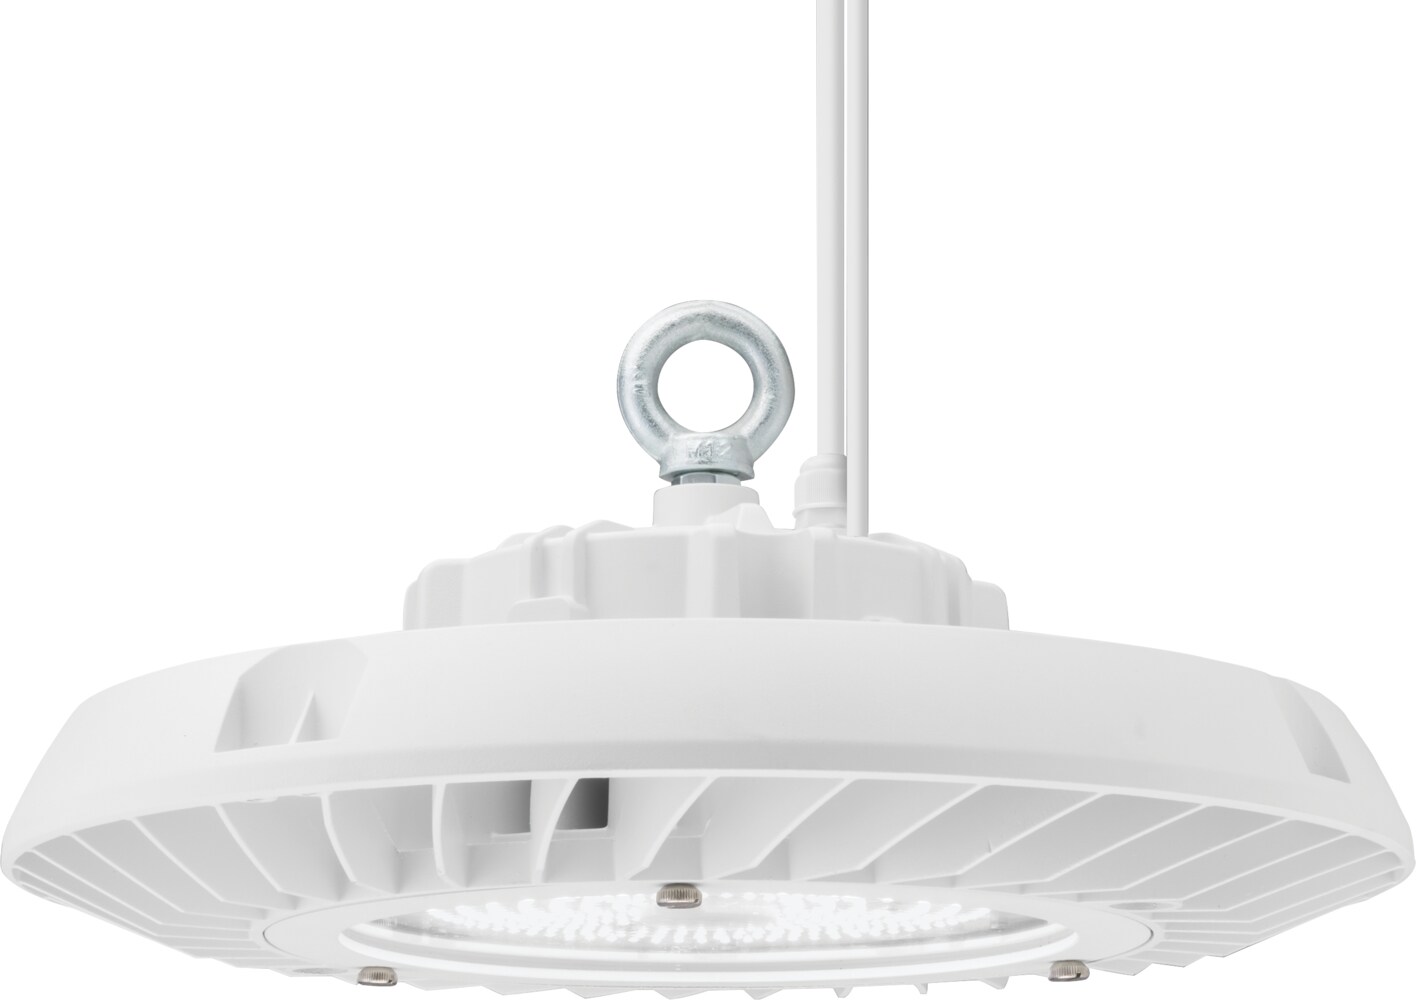 Details about   LITHONIA LIGHTING AHW 70M 6 120/277 MED HSG 951748 